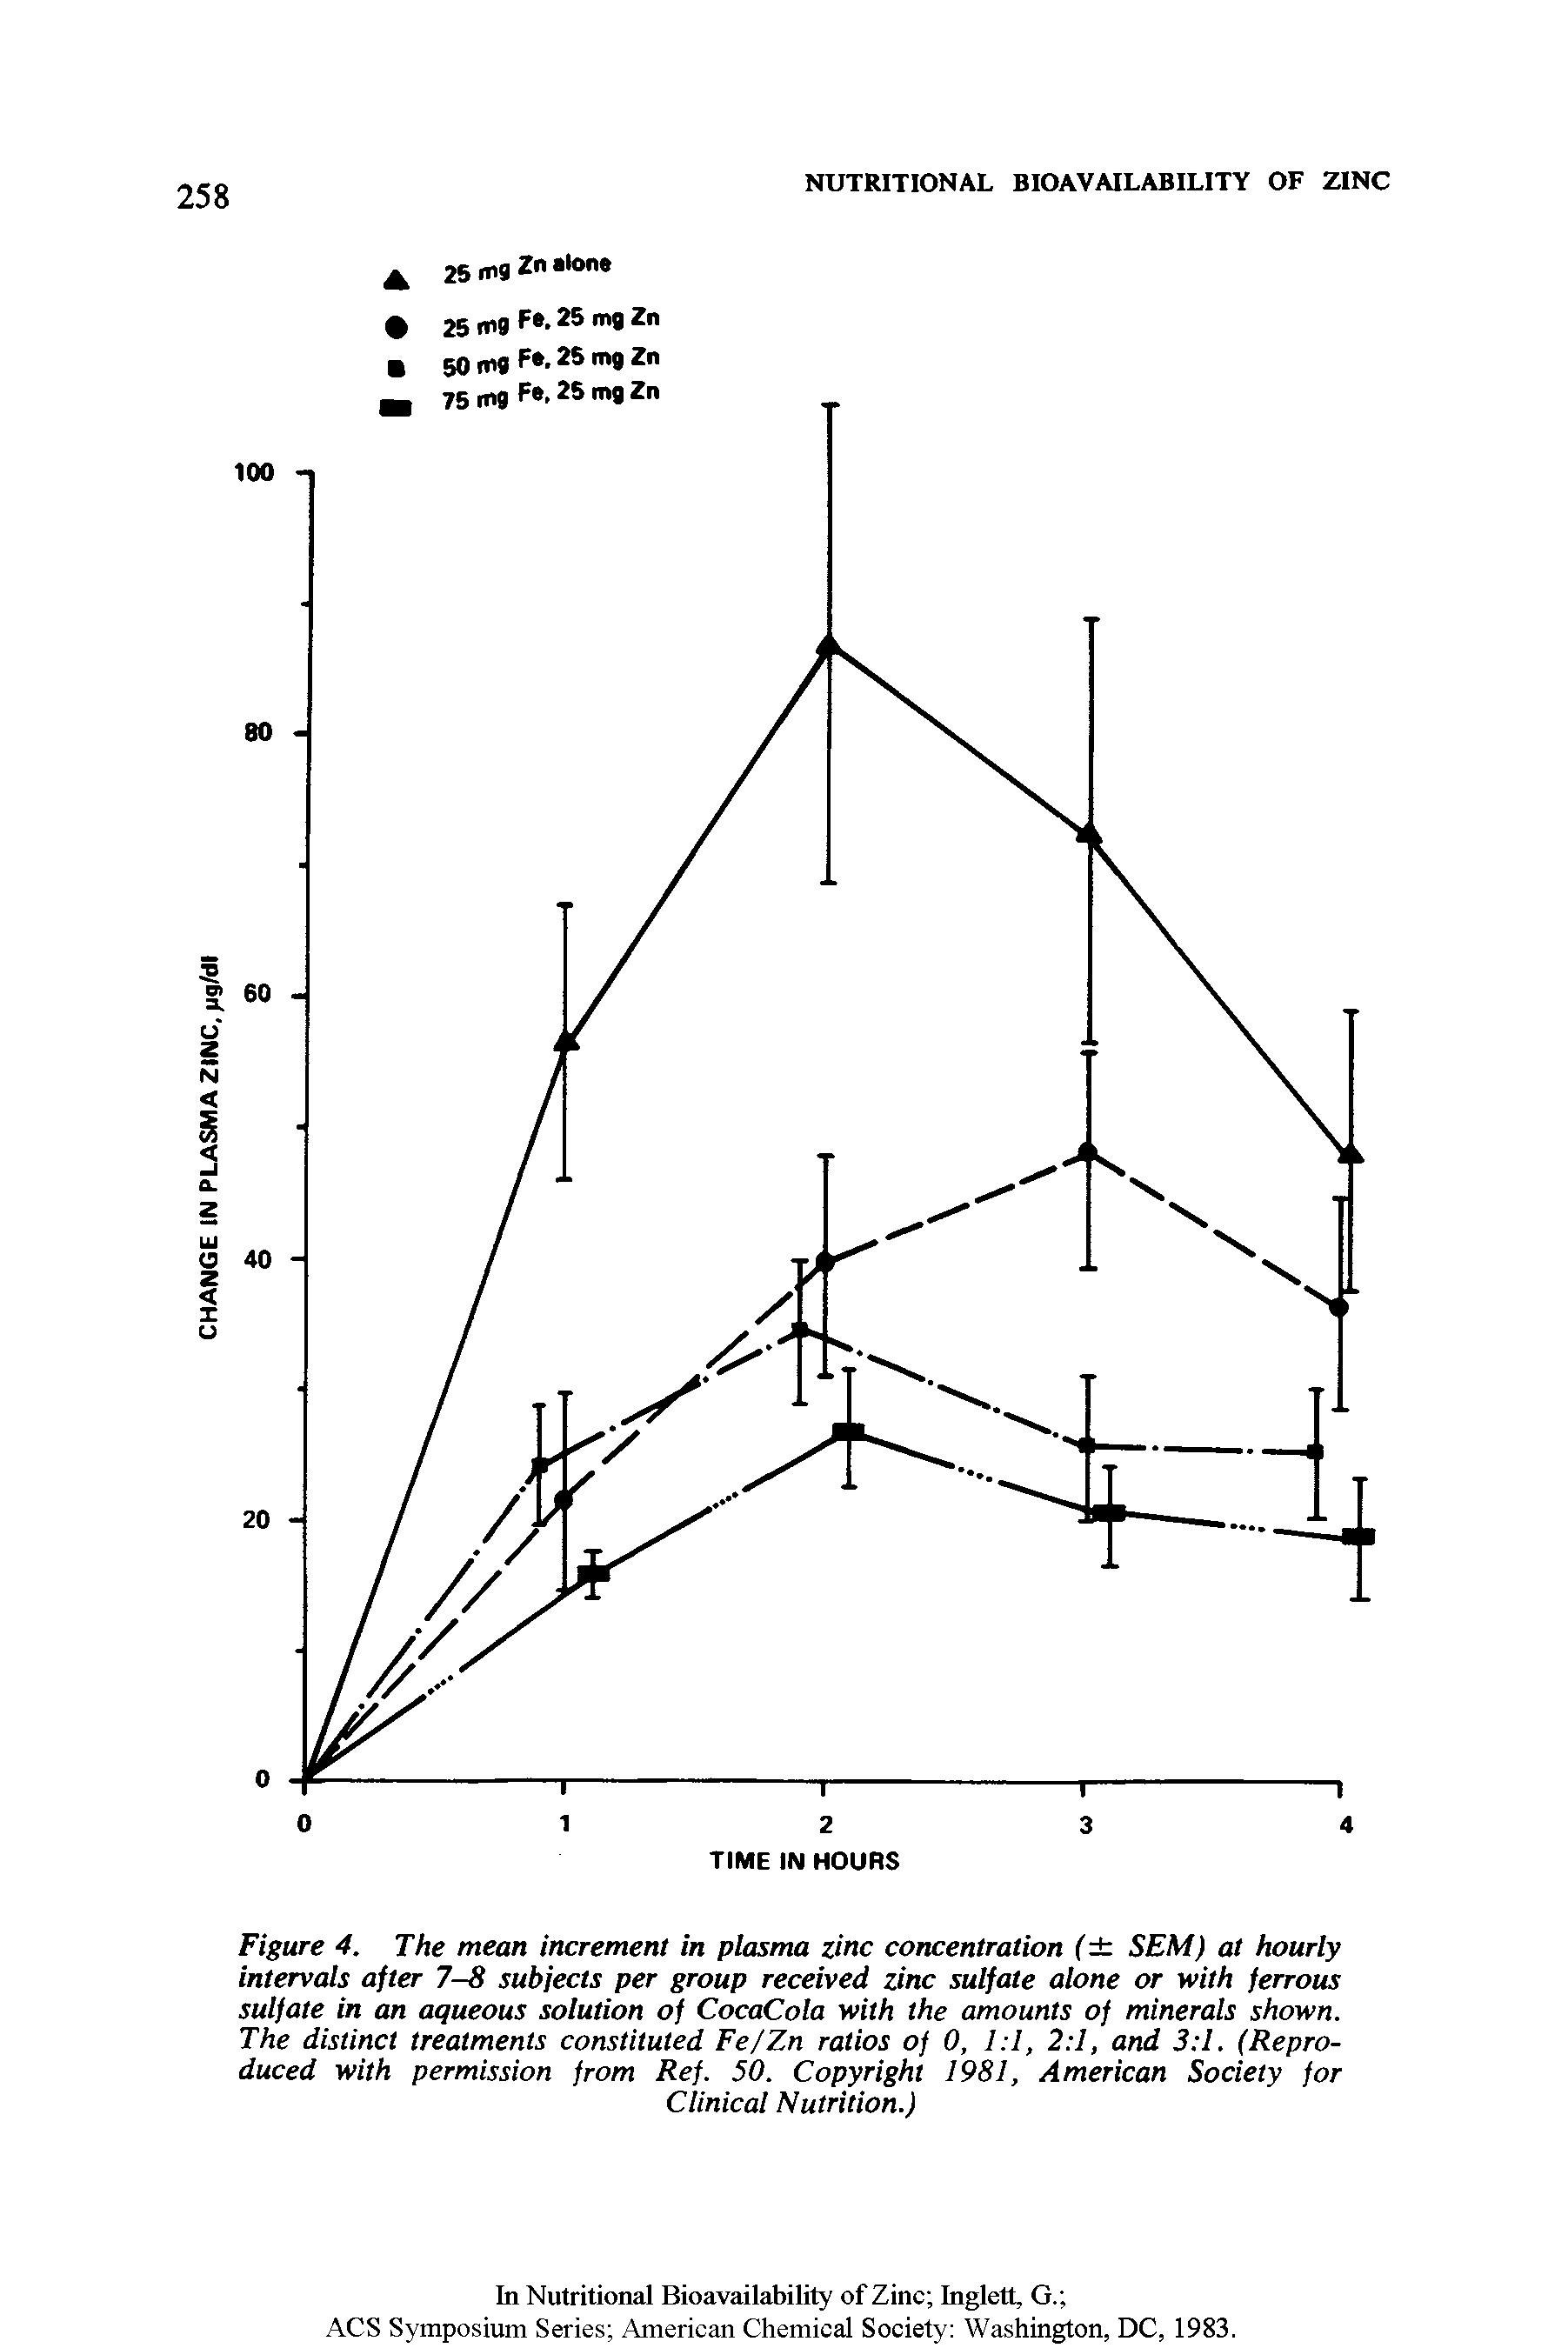 Figure 4. The mean increment in plasma zinc concentration ( SEM) at hourly intervals after 7-8 subjects per group received zinc sulfate alone or with ferrous sulfate in an aqueous solution of CocaCola with the amounts of minerals shown. The distinct treatments constituted Fe/Zn ratios of 0, 1 1, 2 1, and 3 1. (Reproduced with permission from Ref. 50. Copyright 1981, American Society for...